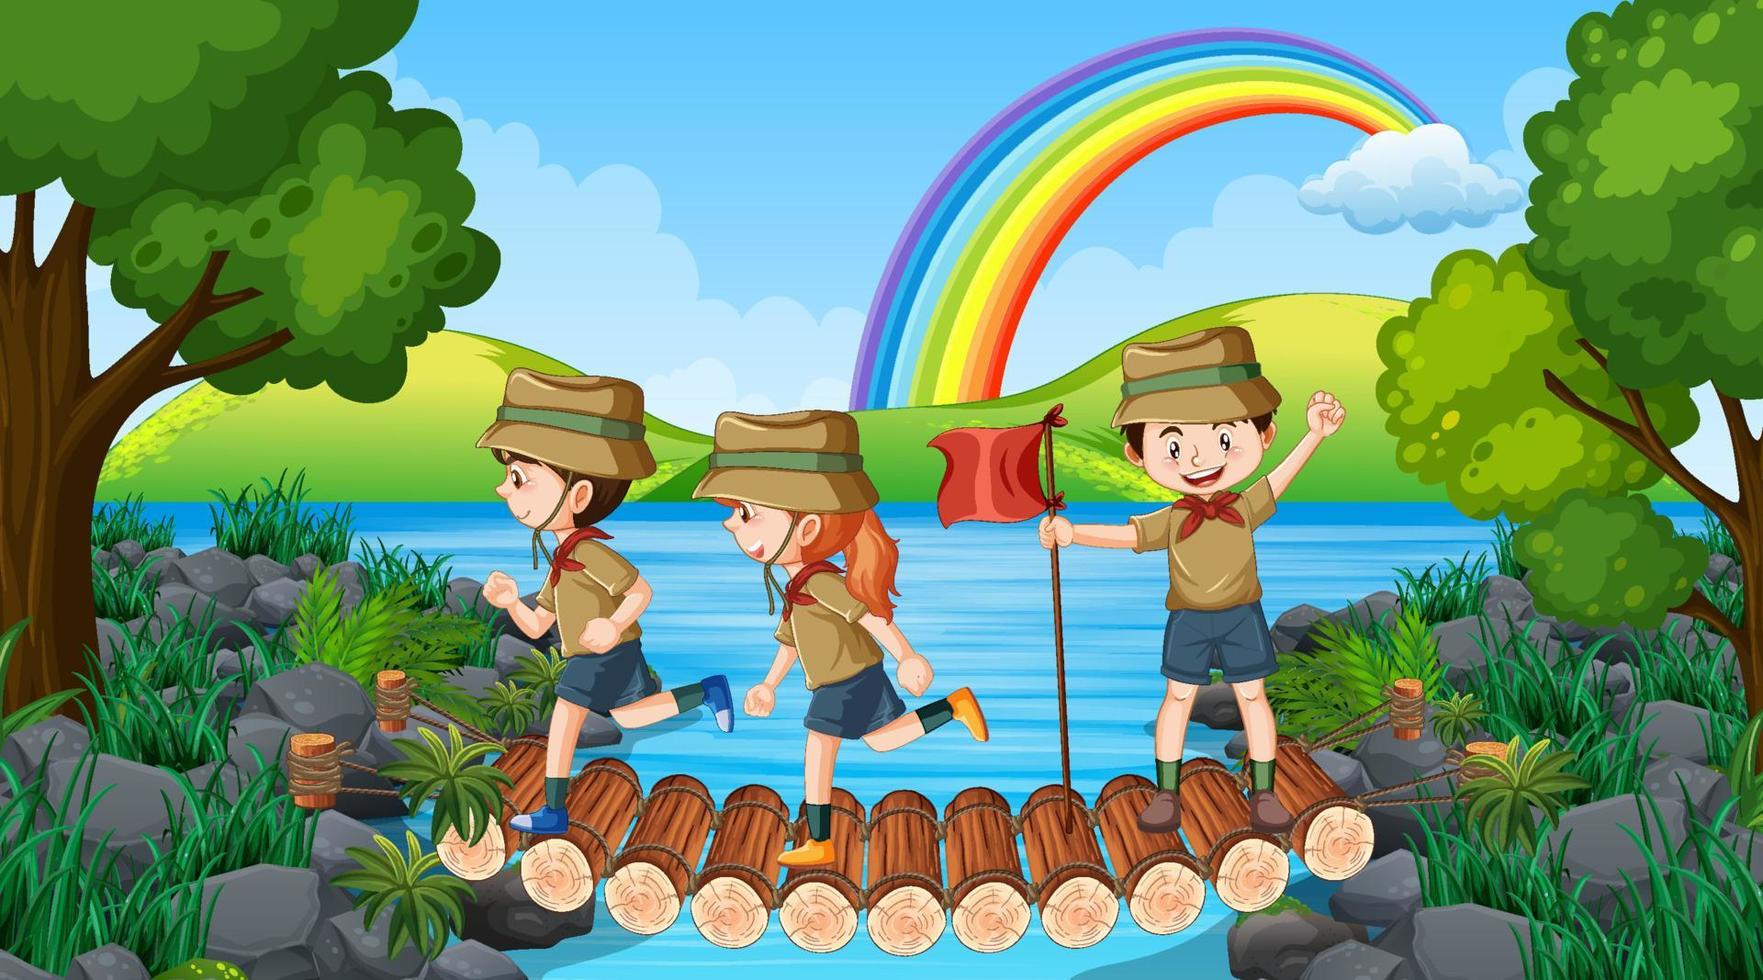 Scout kids hiking in the forest vector